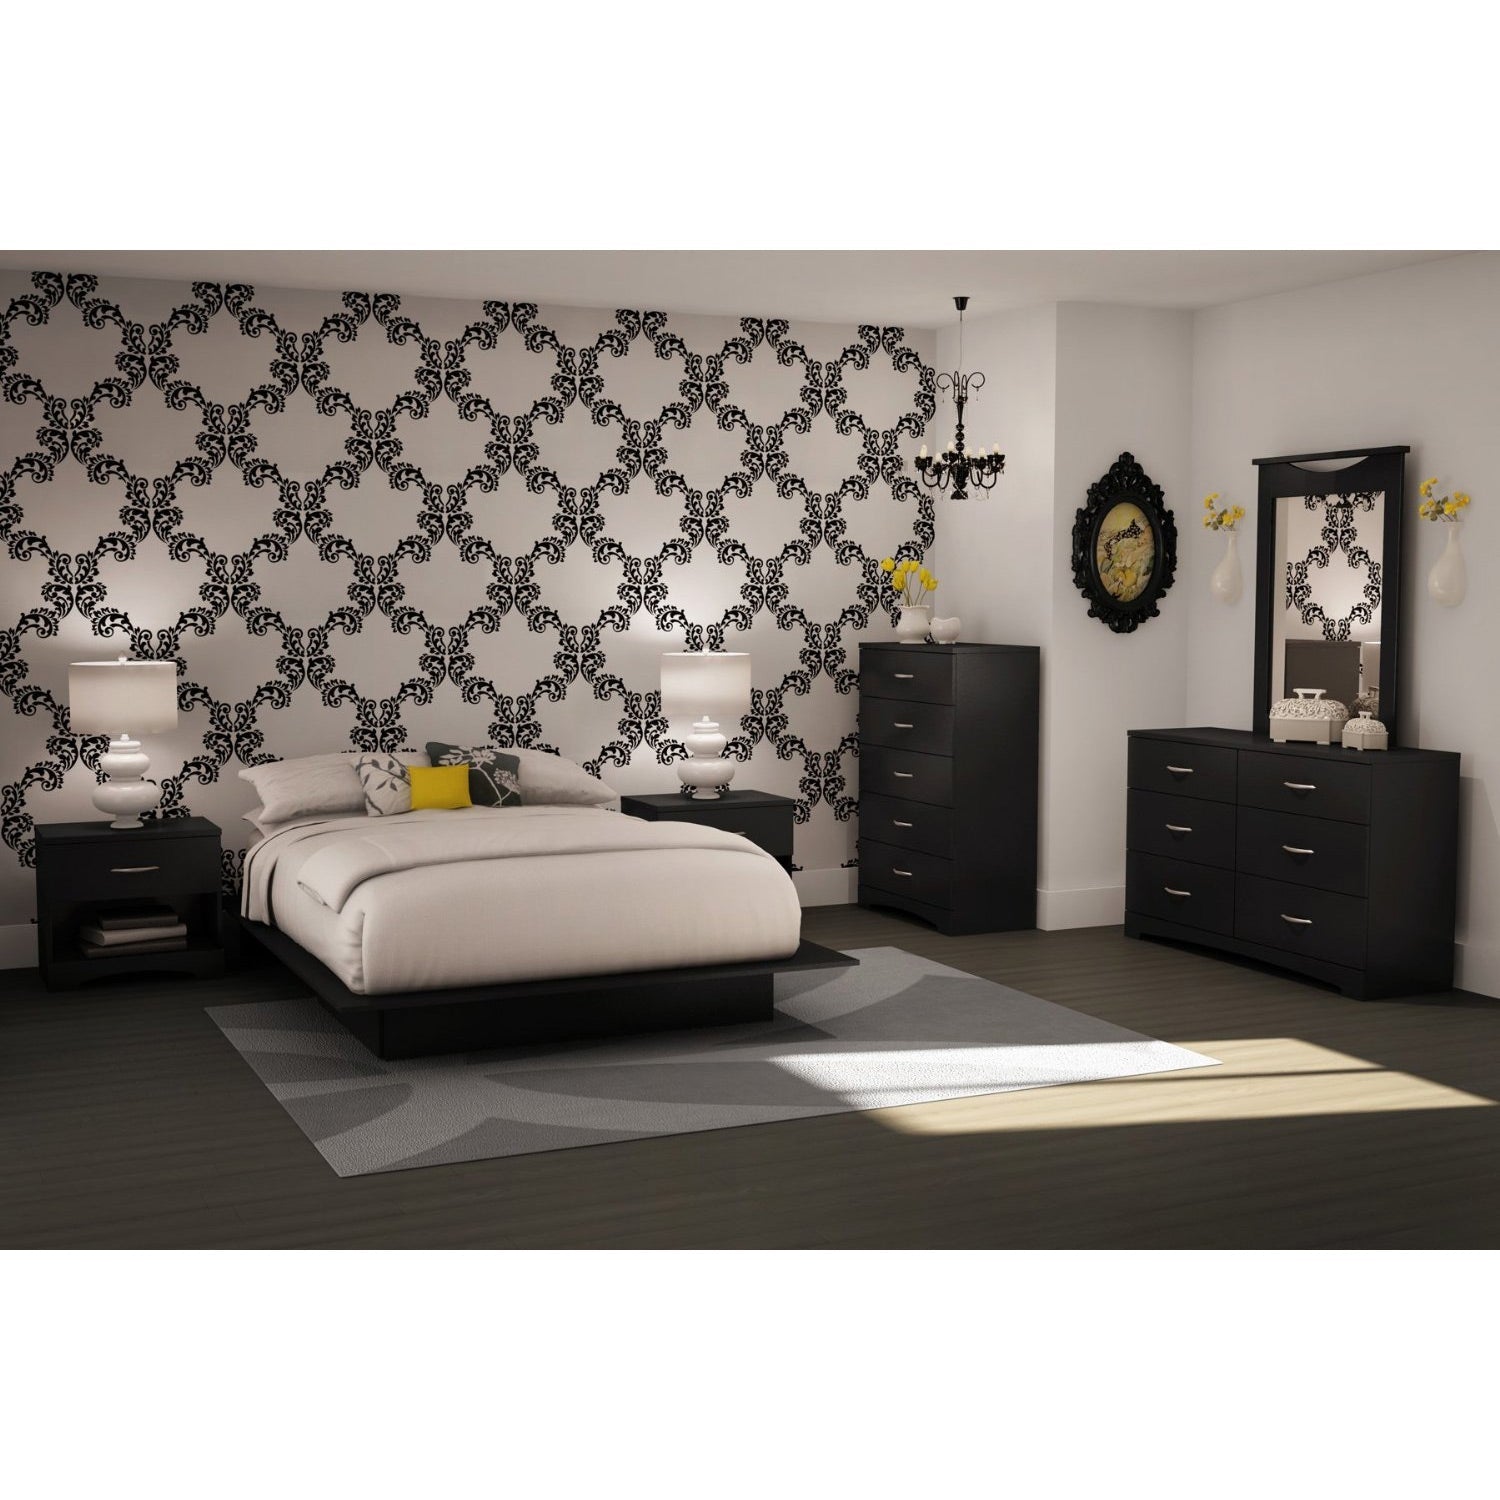 Bedroom > Nightstand And Dressers - Modern 5-Drawer Bedroom Chest In Black Wood Finish